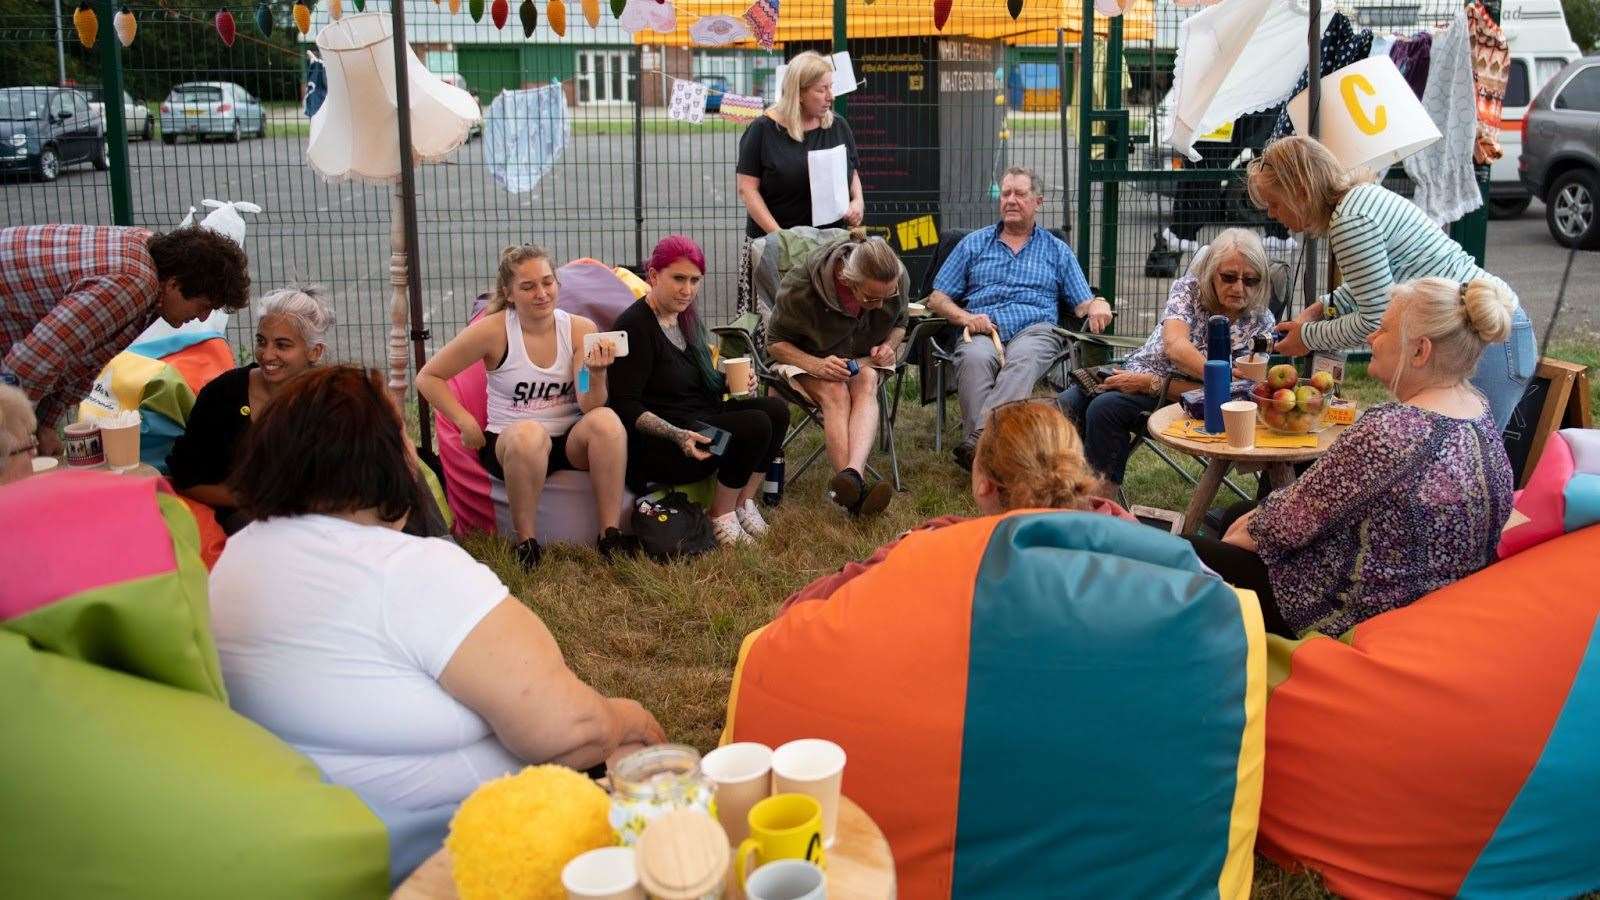 The outdoor public living room in Aylesham, pictured in summer 2021